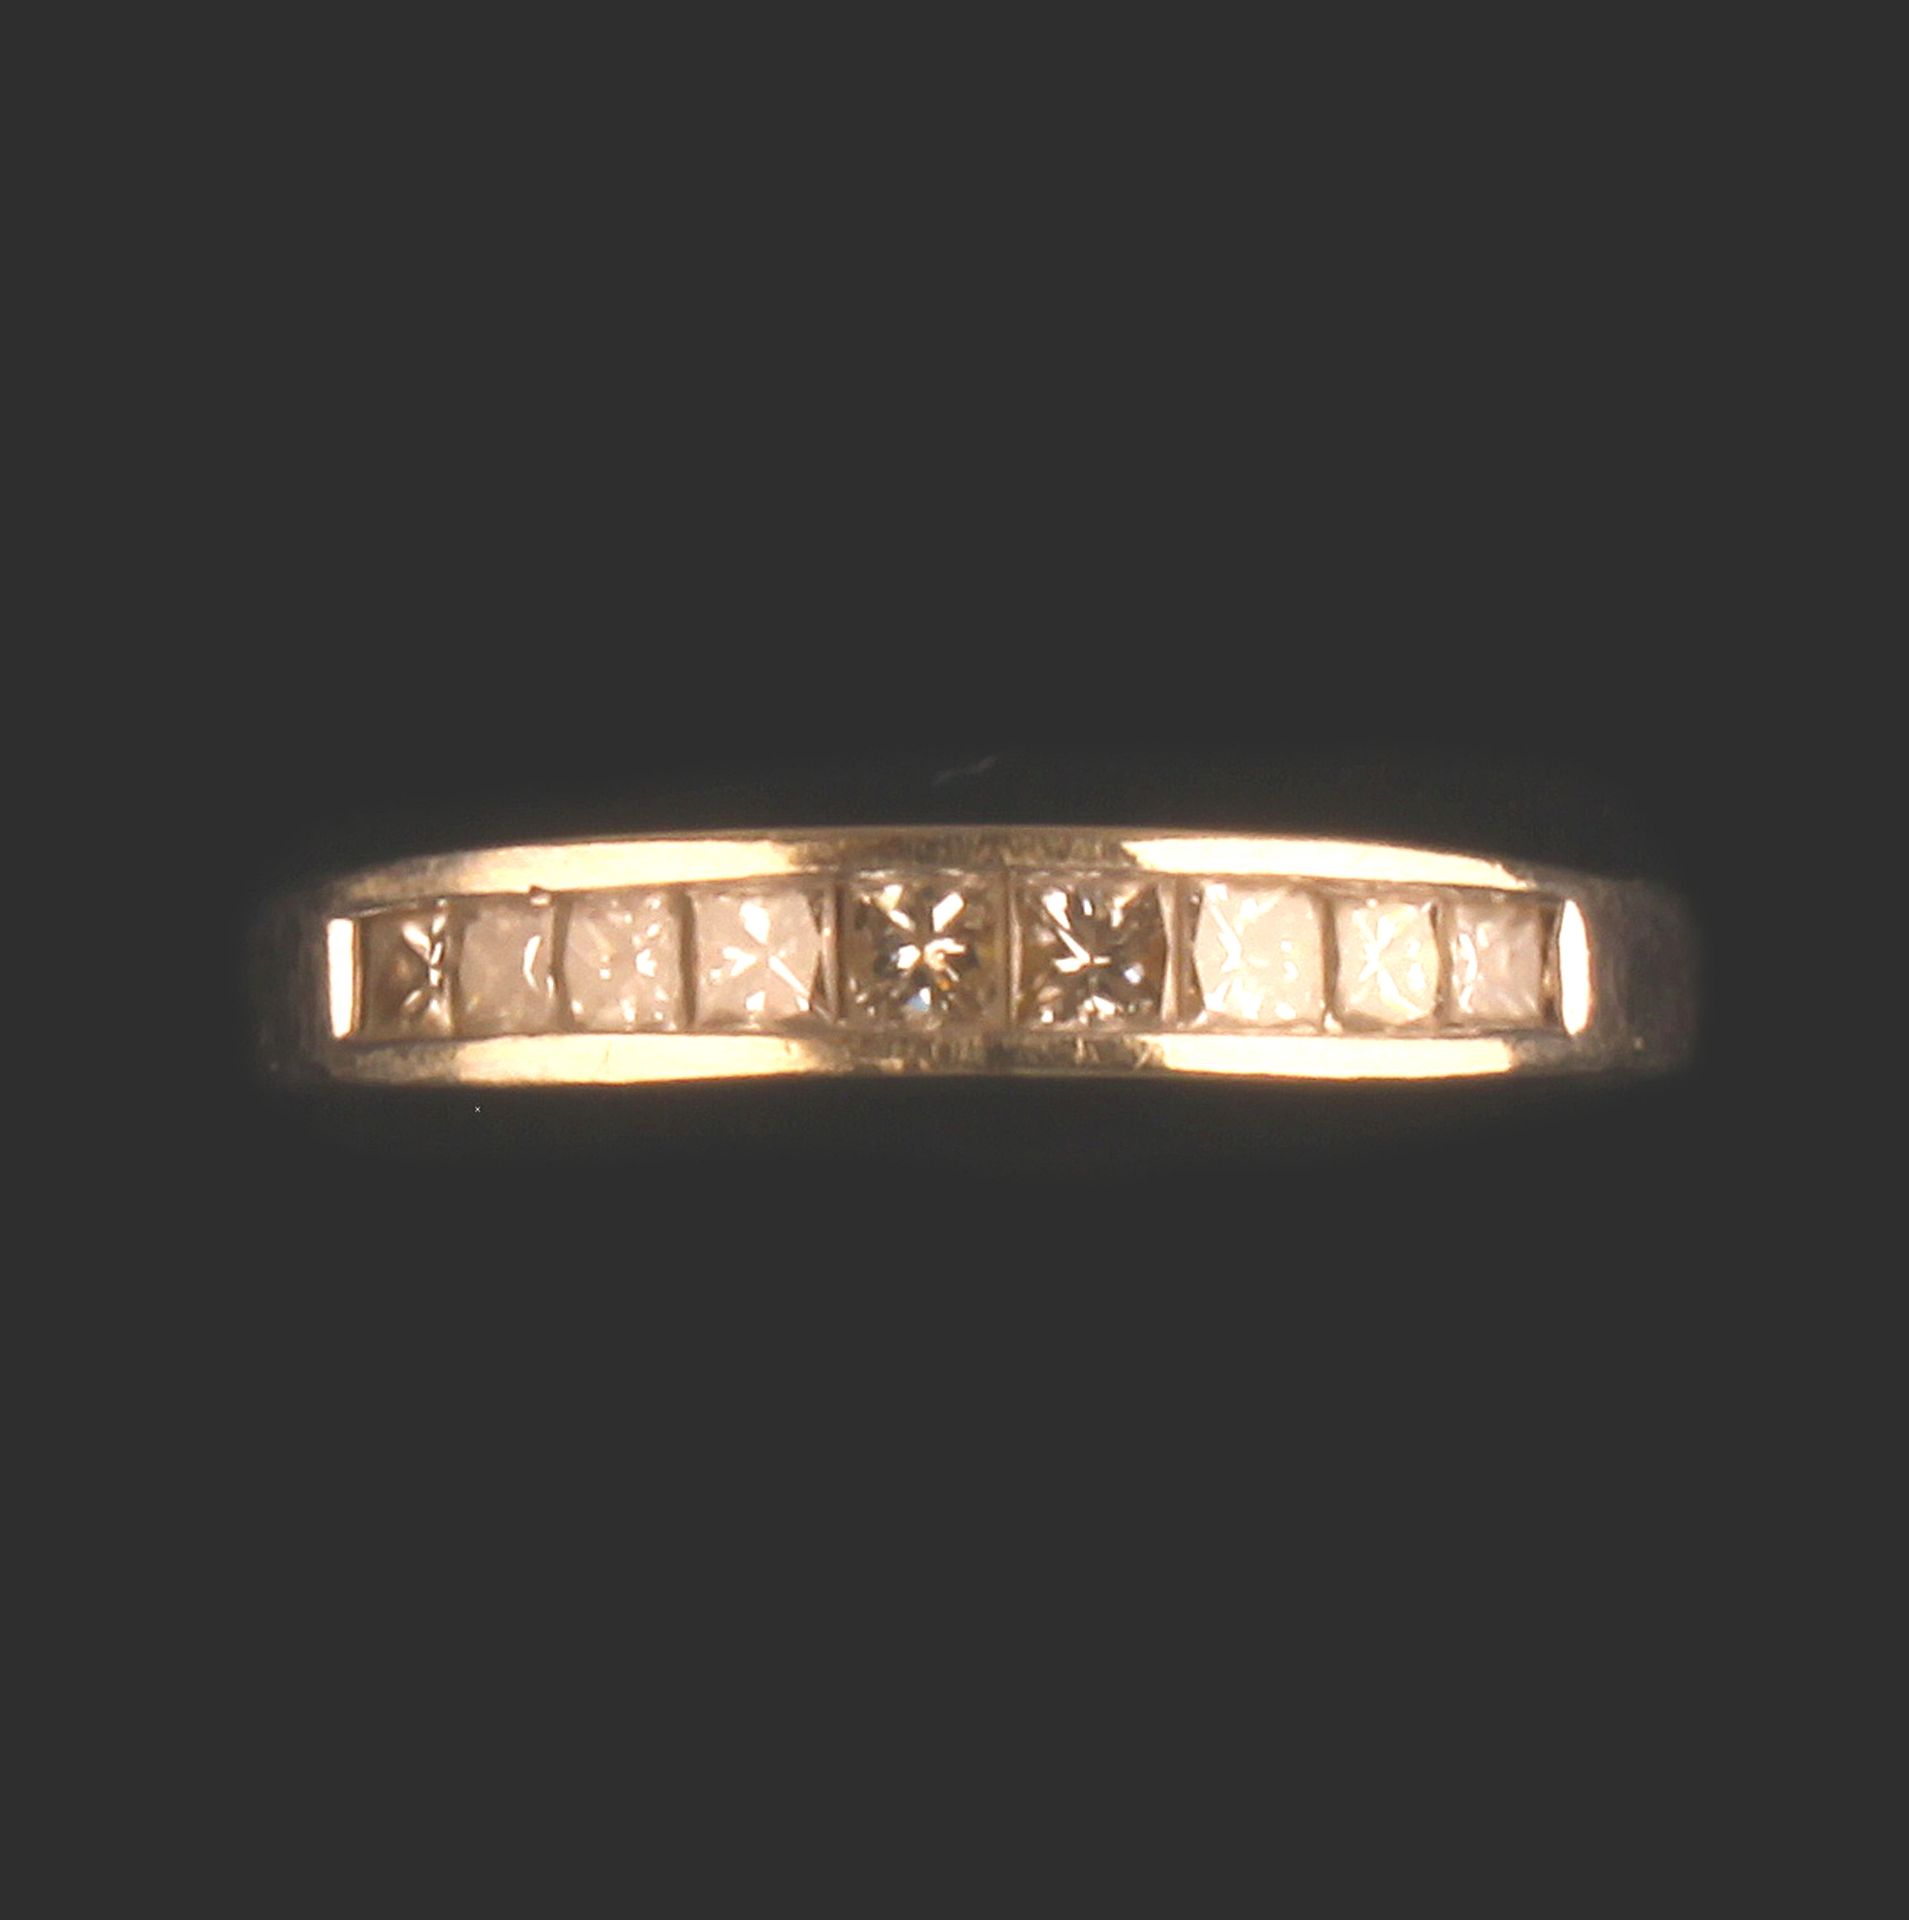 1/2 ETERNITY DIAMOND RING IN WHITE METAL TESTED AS AT LEAST 9ct GOLD - Image 3 of 4